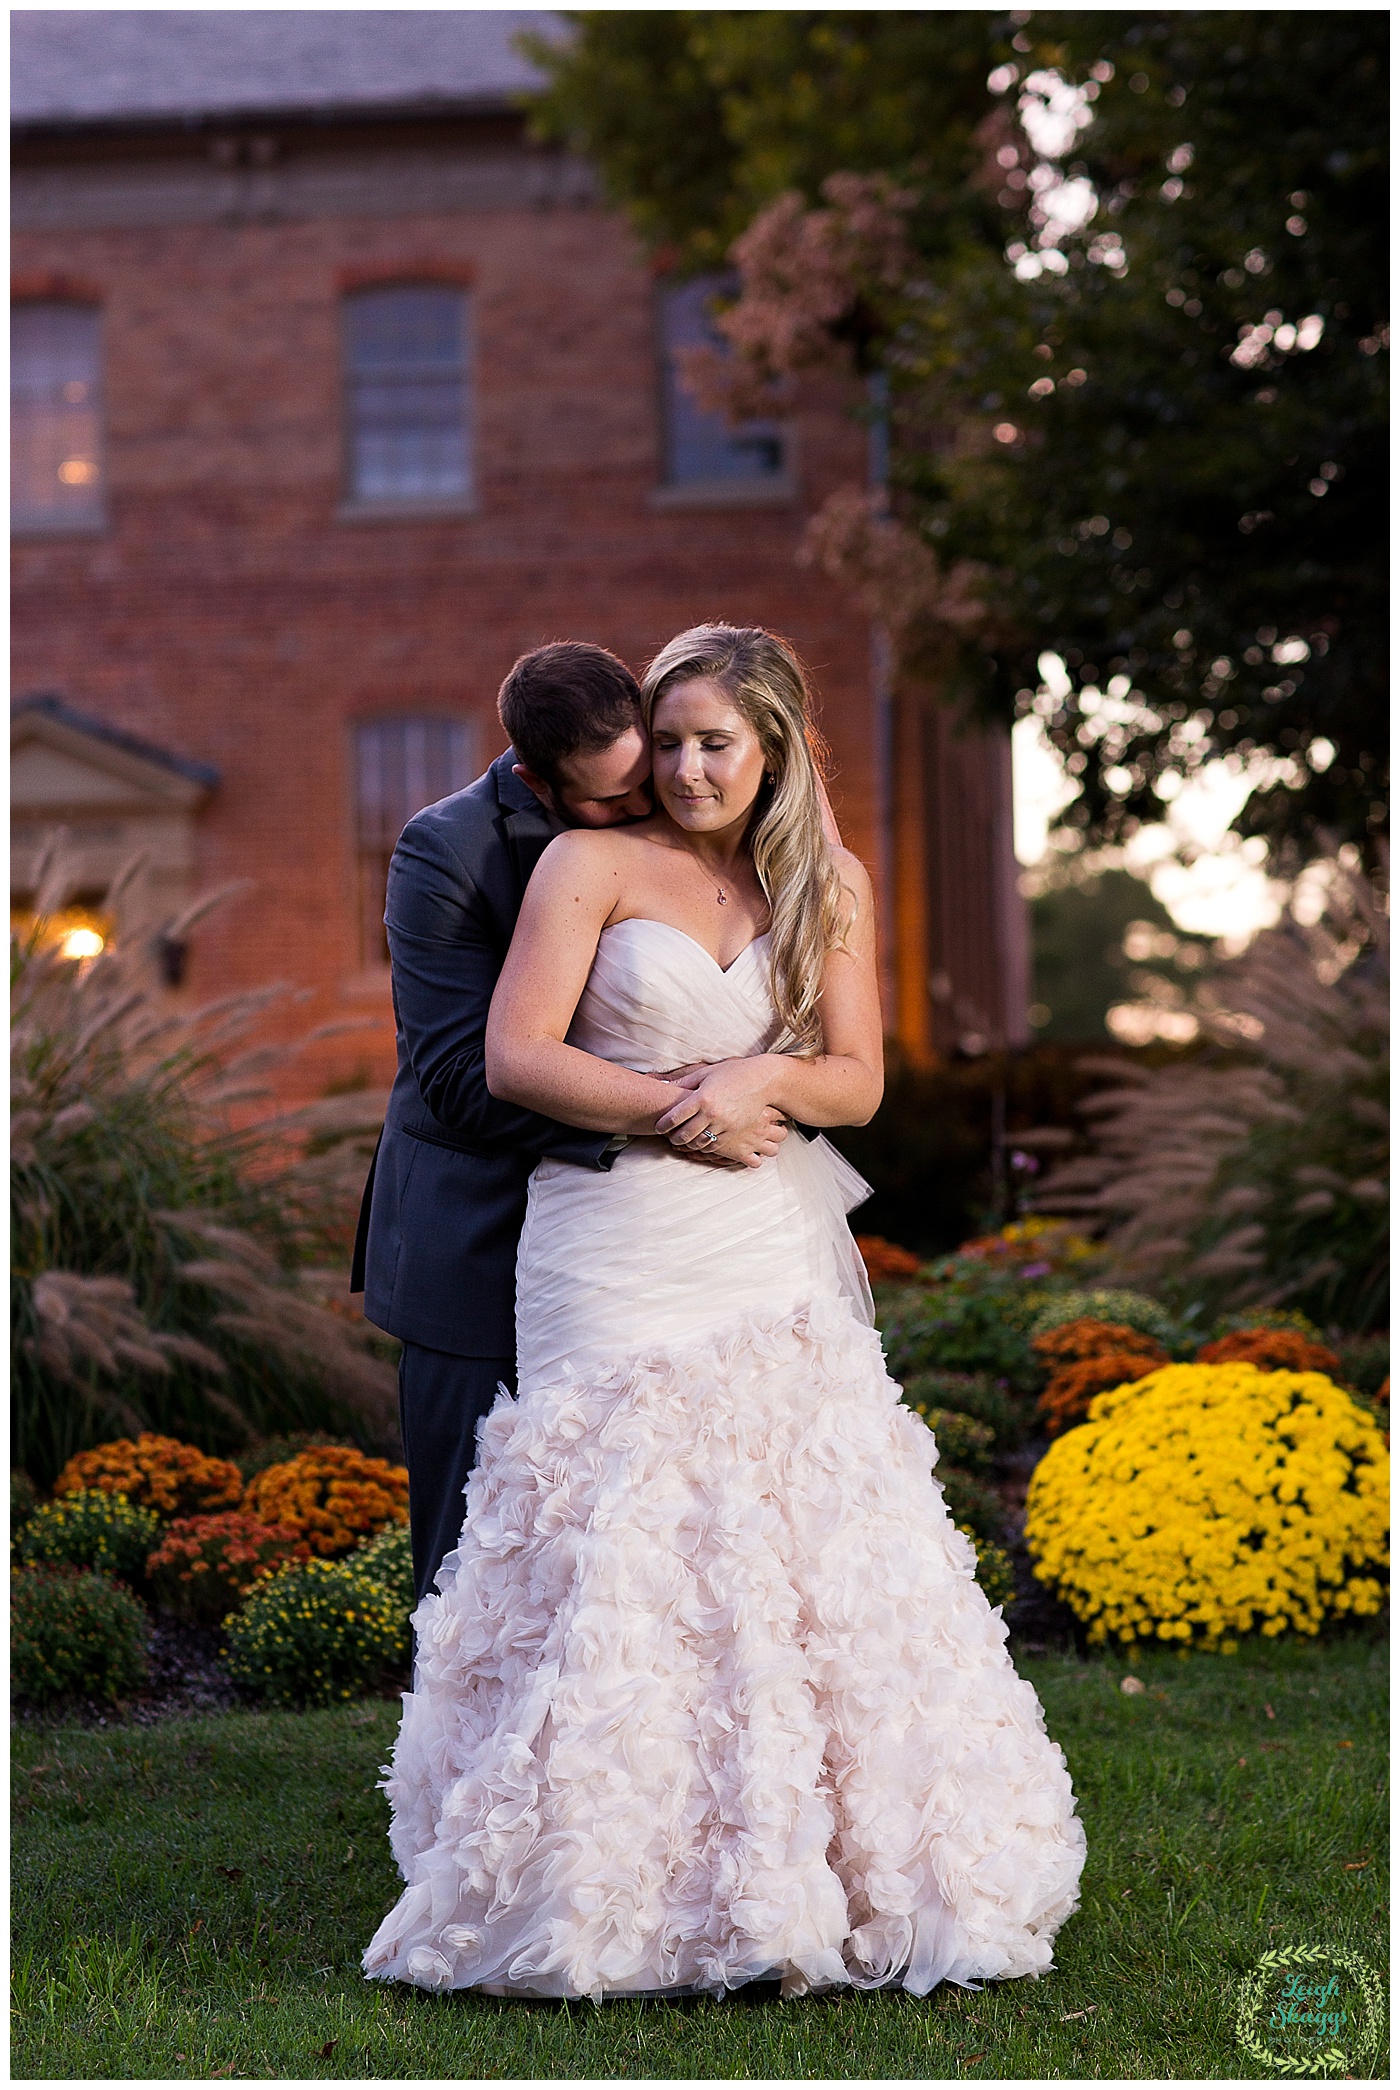 Erin & DJ are Married!!  A William and Mary Alumni House wedding in Williamsburg Virginia!